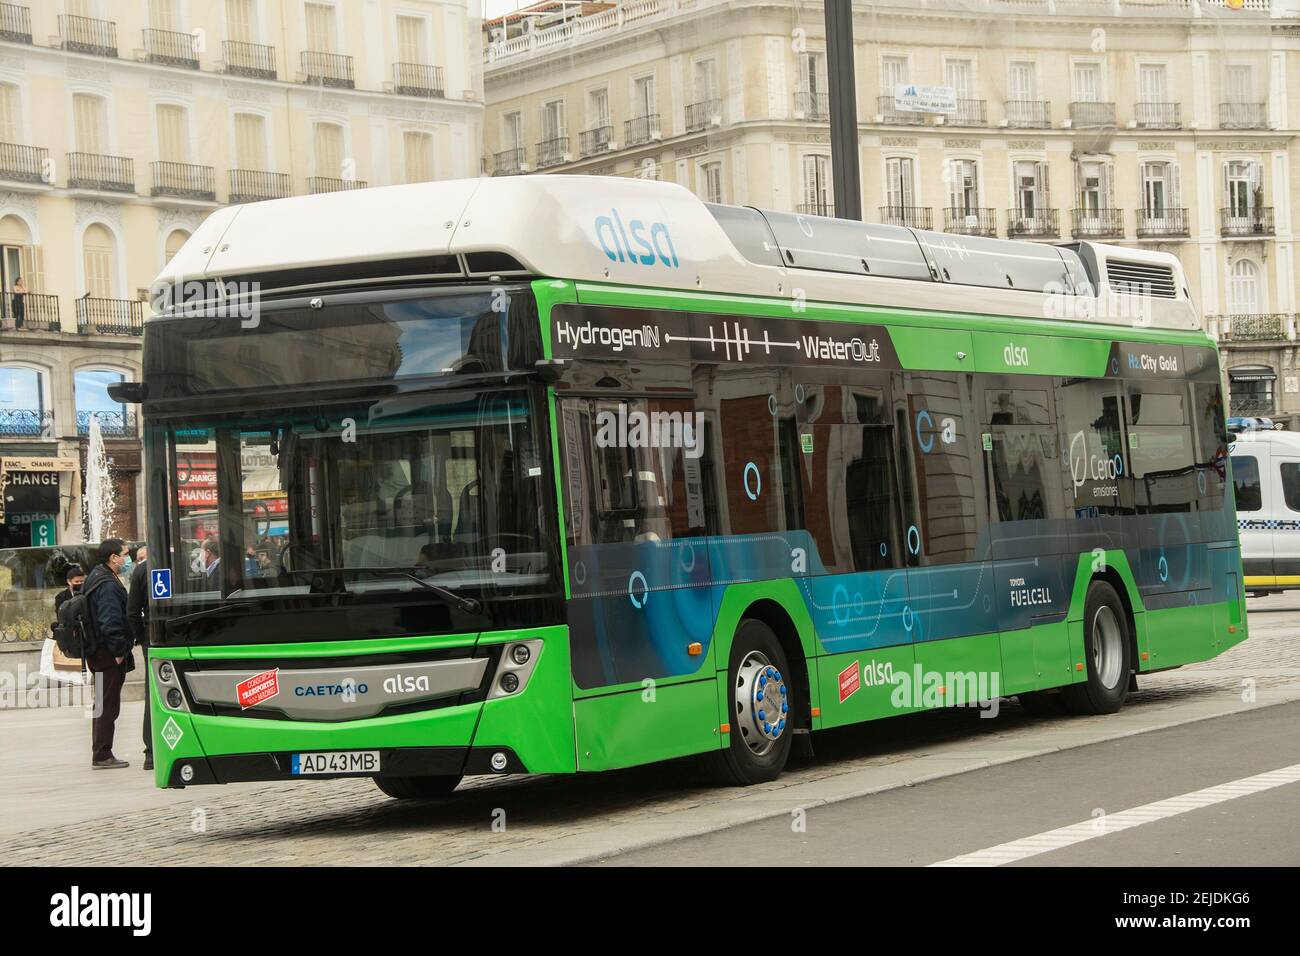 The Community of Madrid has presented this Monday the first hydrogen bus  that will circulate in Spain, a vehicle that uses an electric propulsion  system with a fuel cell powered by hydrogen.